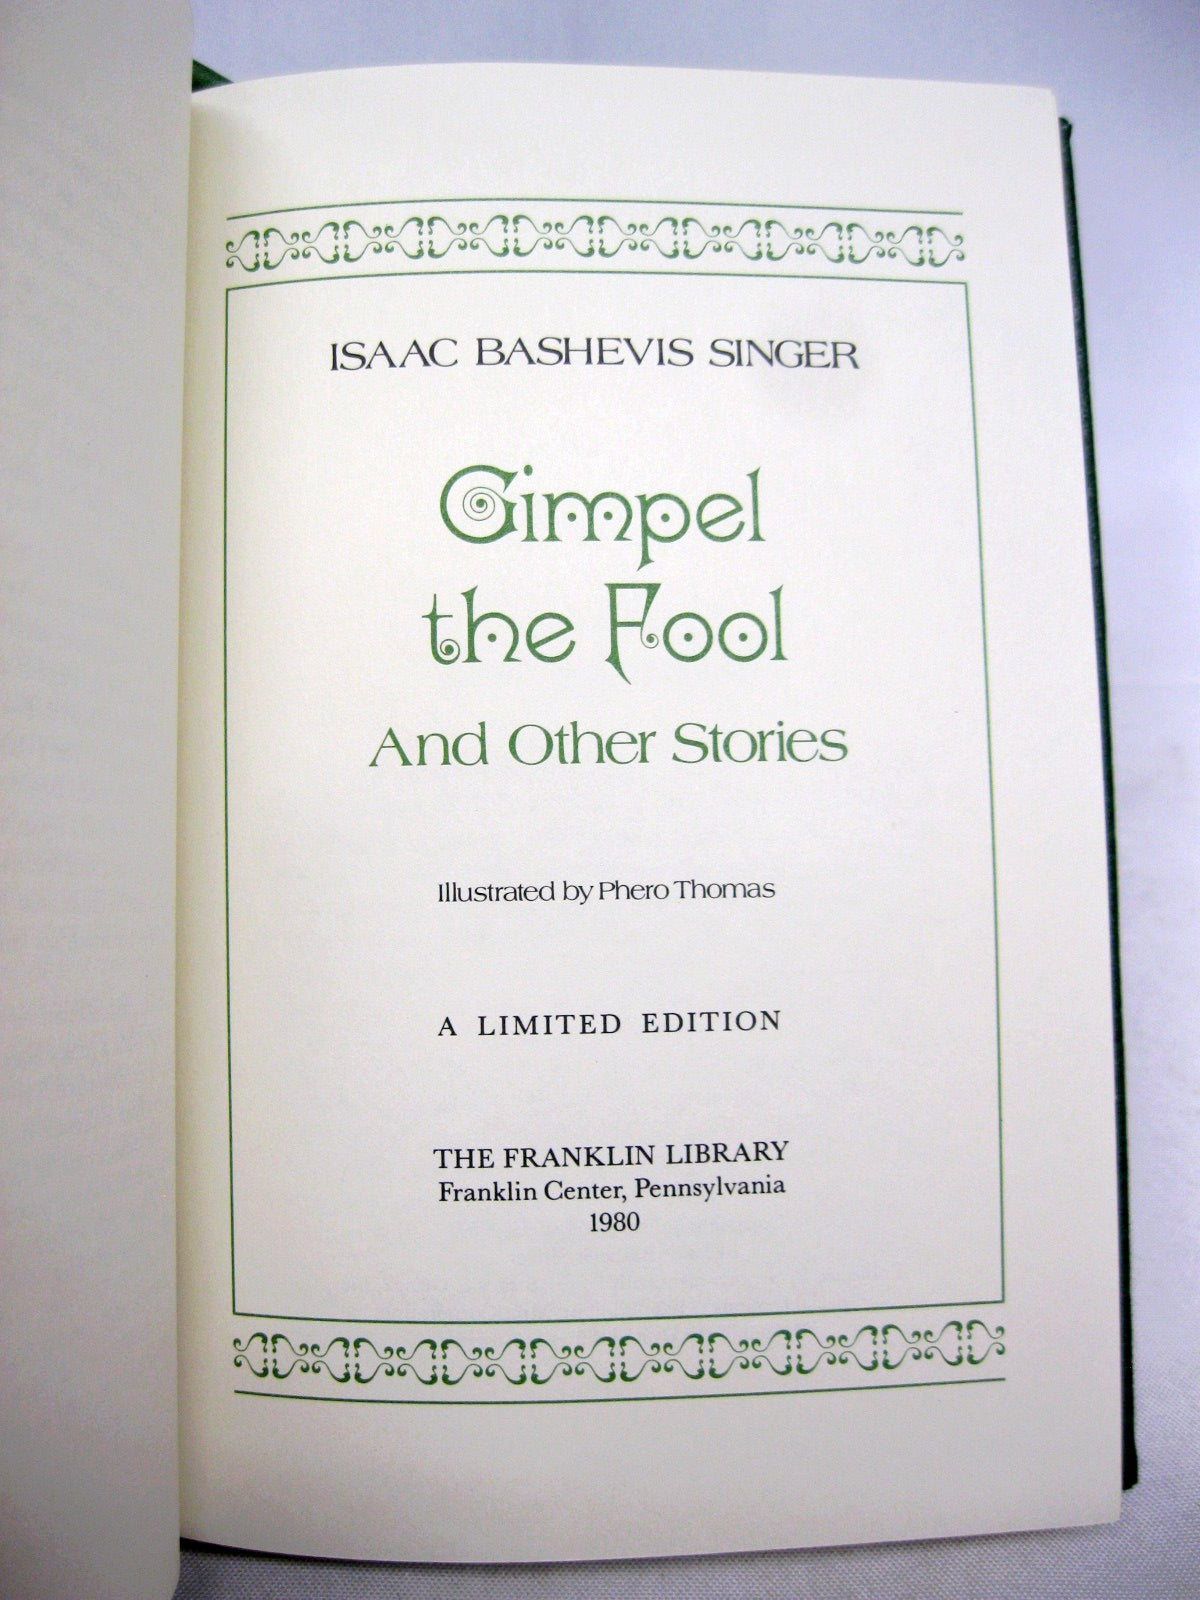 Gimpel the Fool and Other Stories by Isaac Bashevis Singer